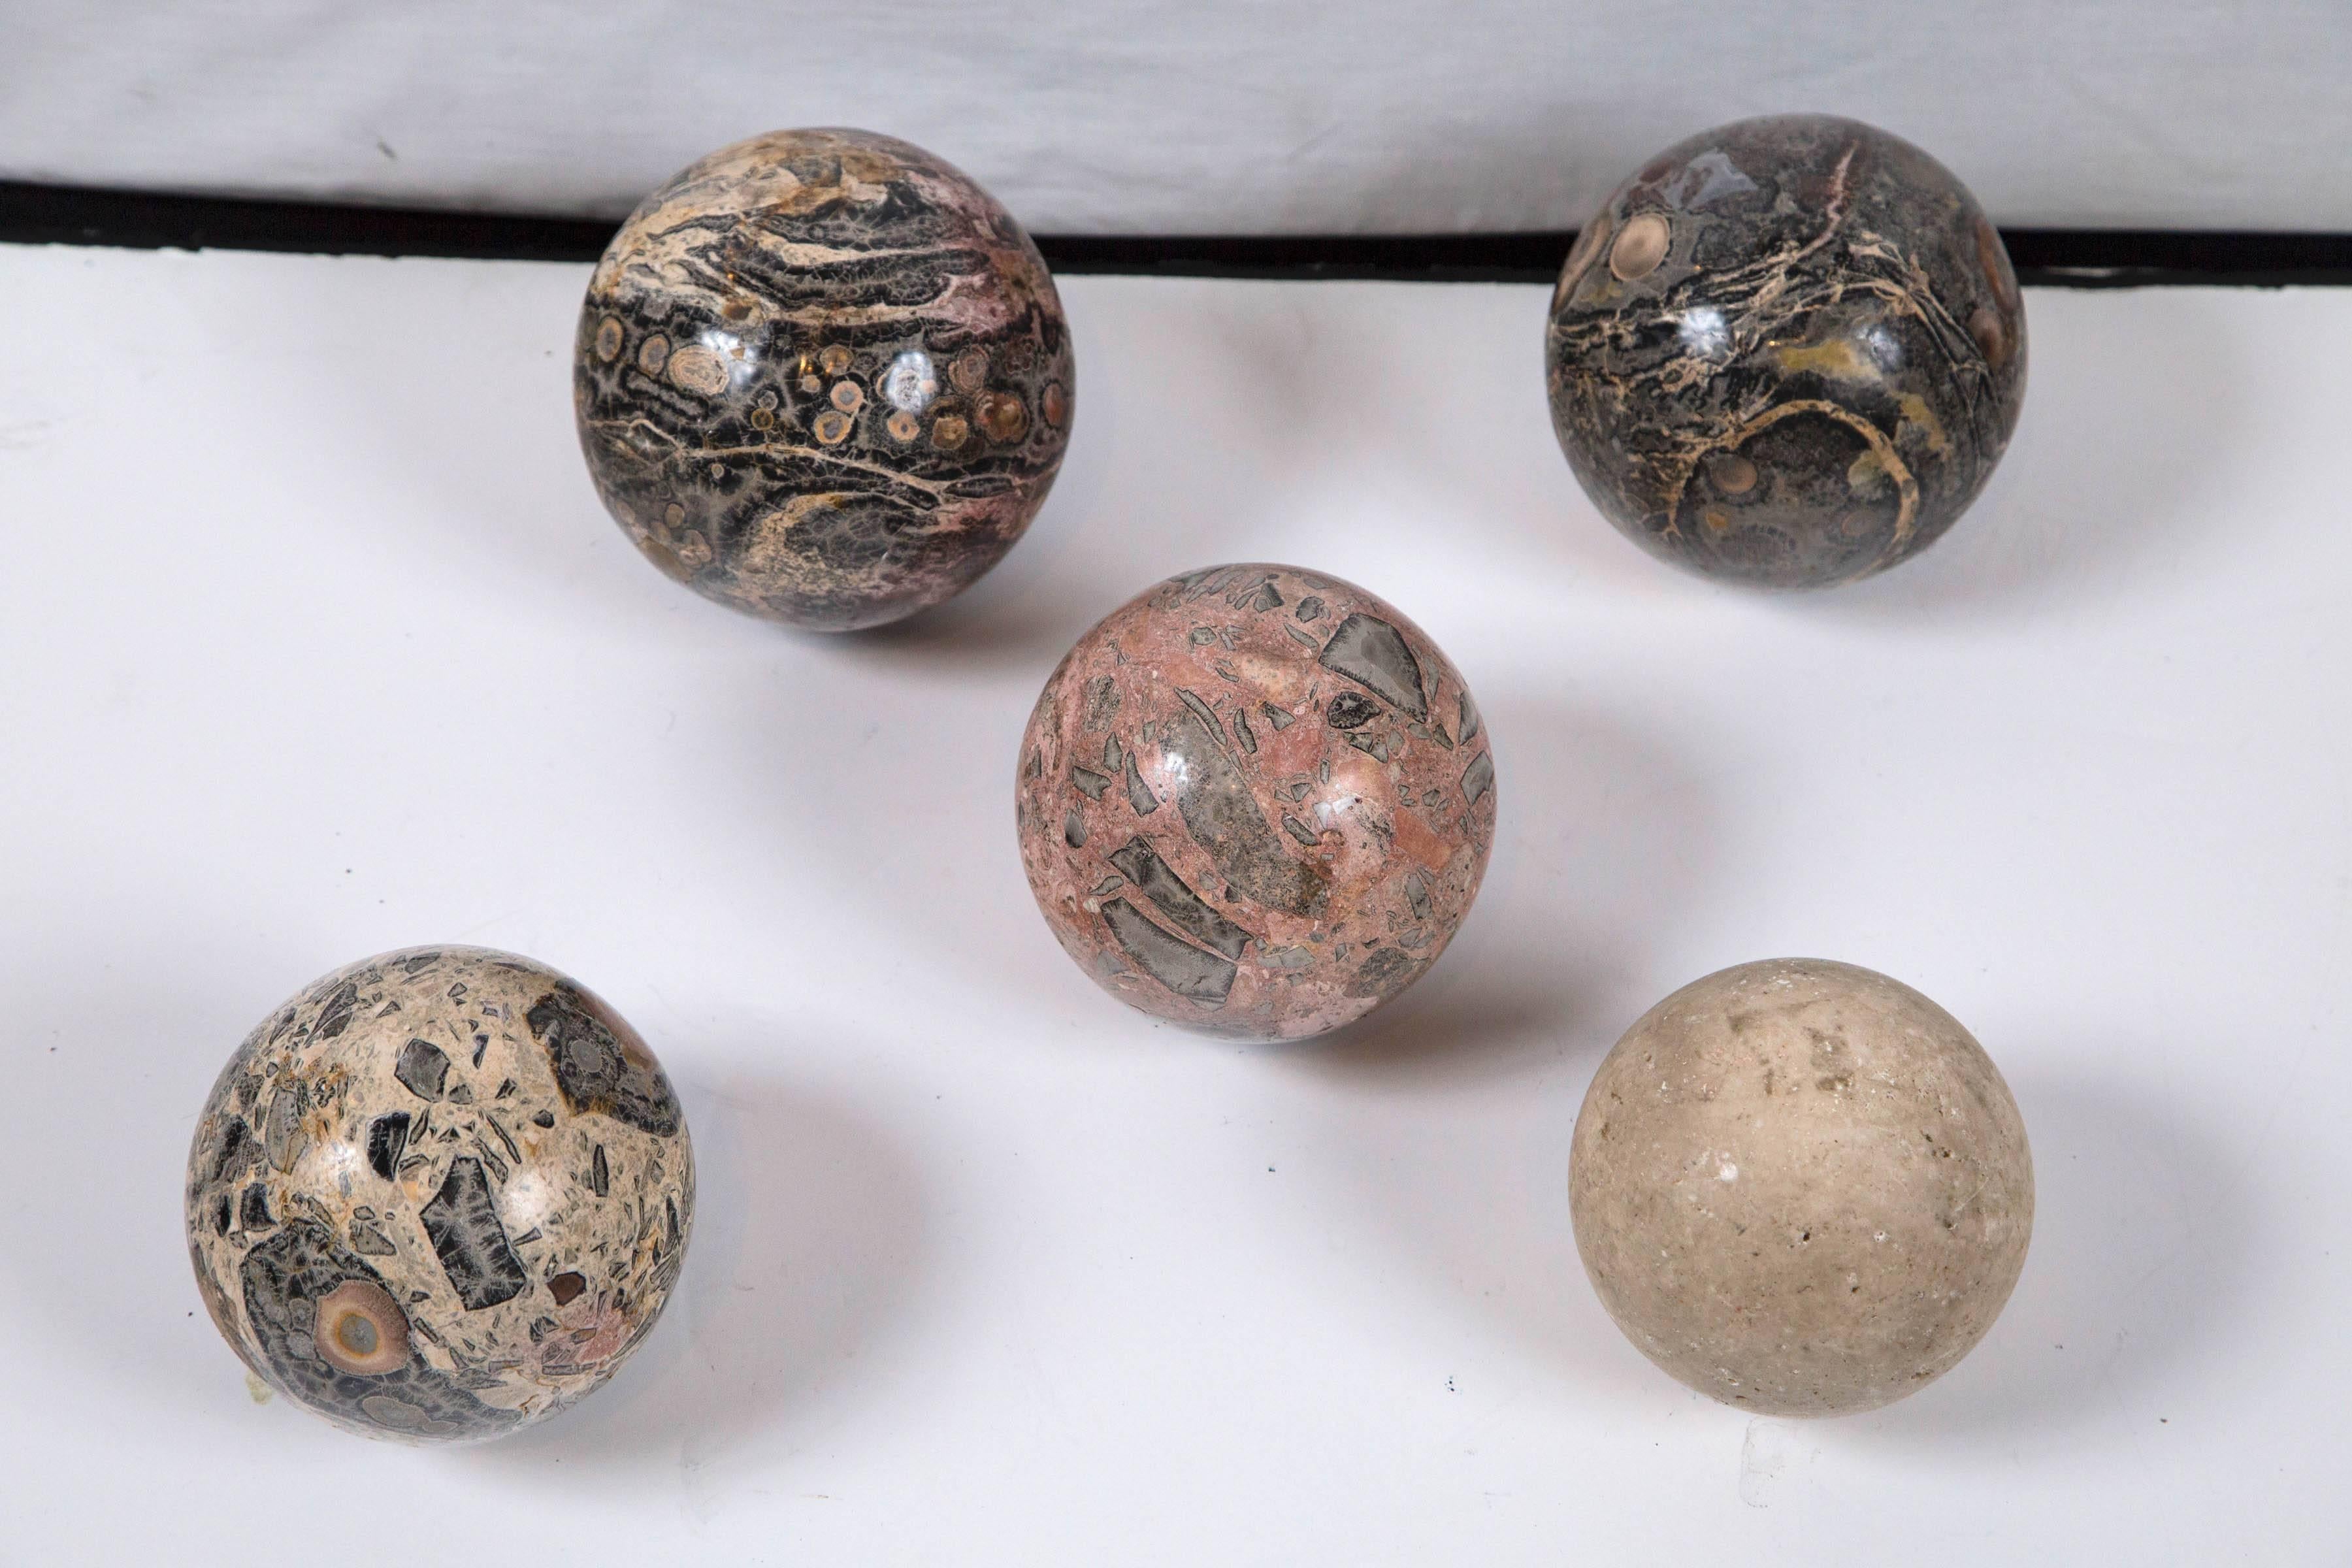 Set of five polished marble spheres, Italy, circa 1950s. Each a different stone specimen. Sizes range from 4.5 inches to 5.5 inches. Display individually on stands or as group for a lovely decorative design accessory.